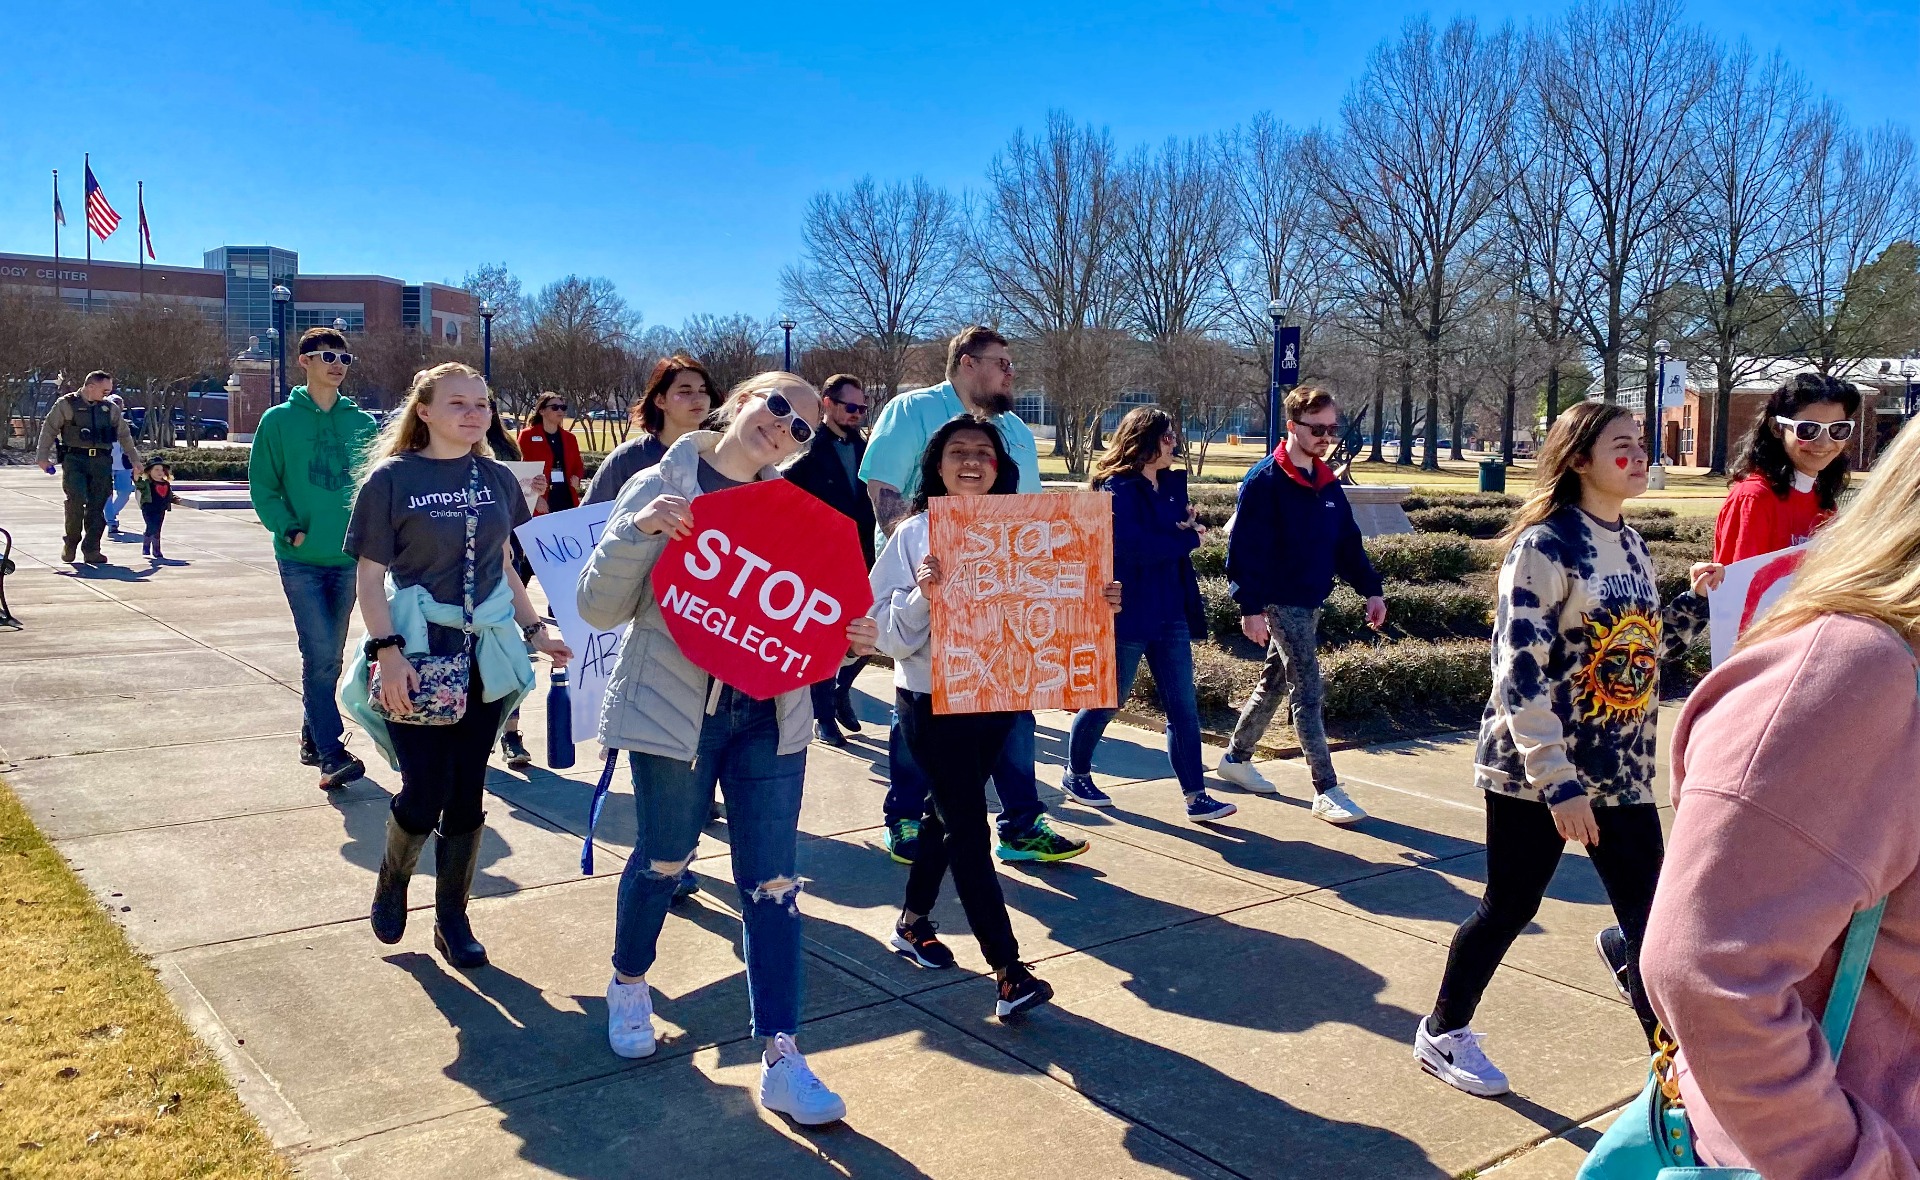 students marching holding signs that state 